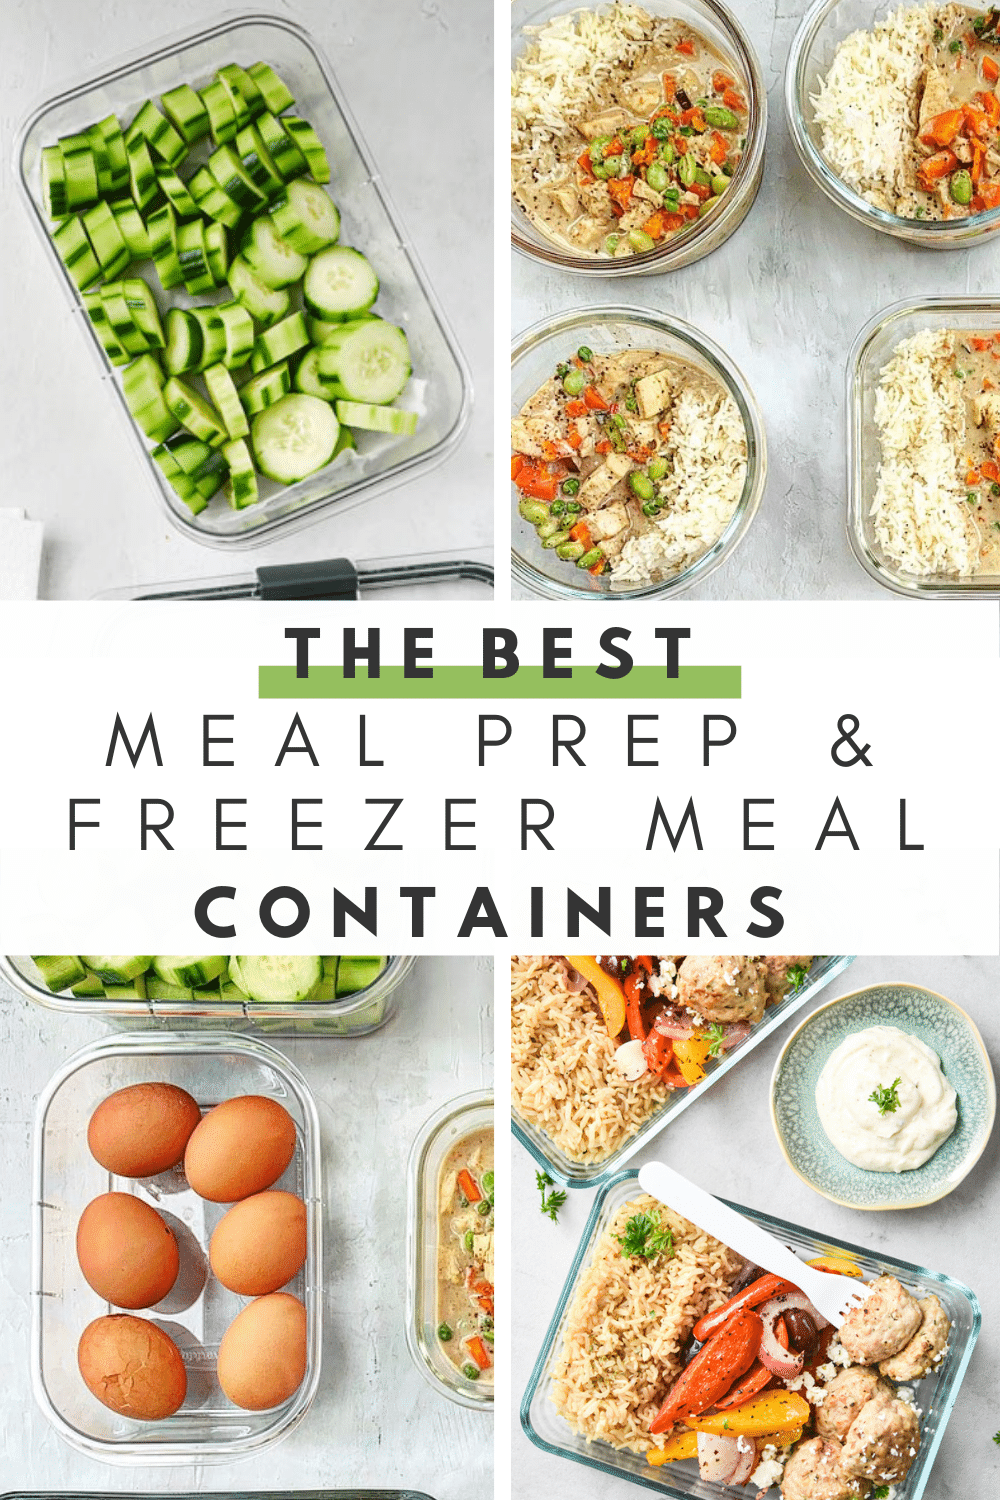 The Best Meal Prep (and freezer meal) Containers to buy!